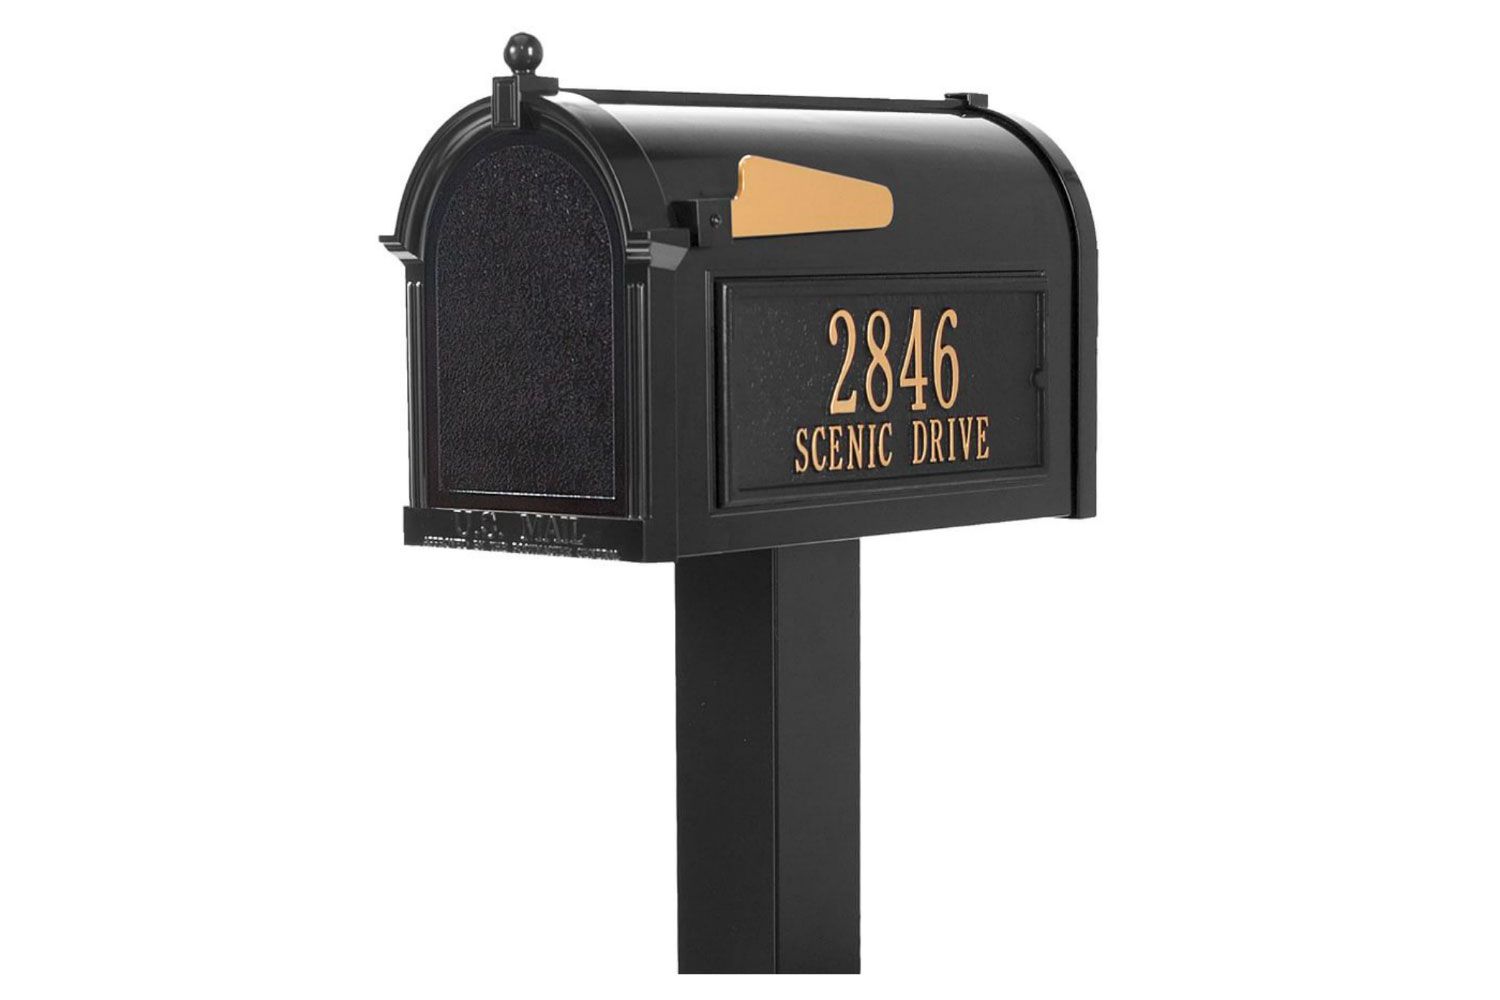 Where to Buy | Architectural Mailboxes